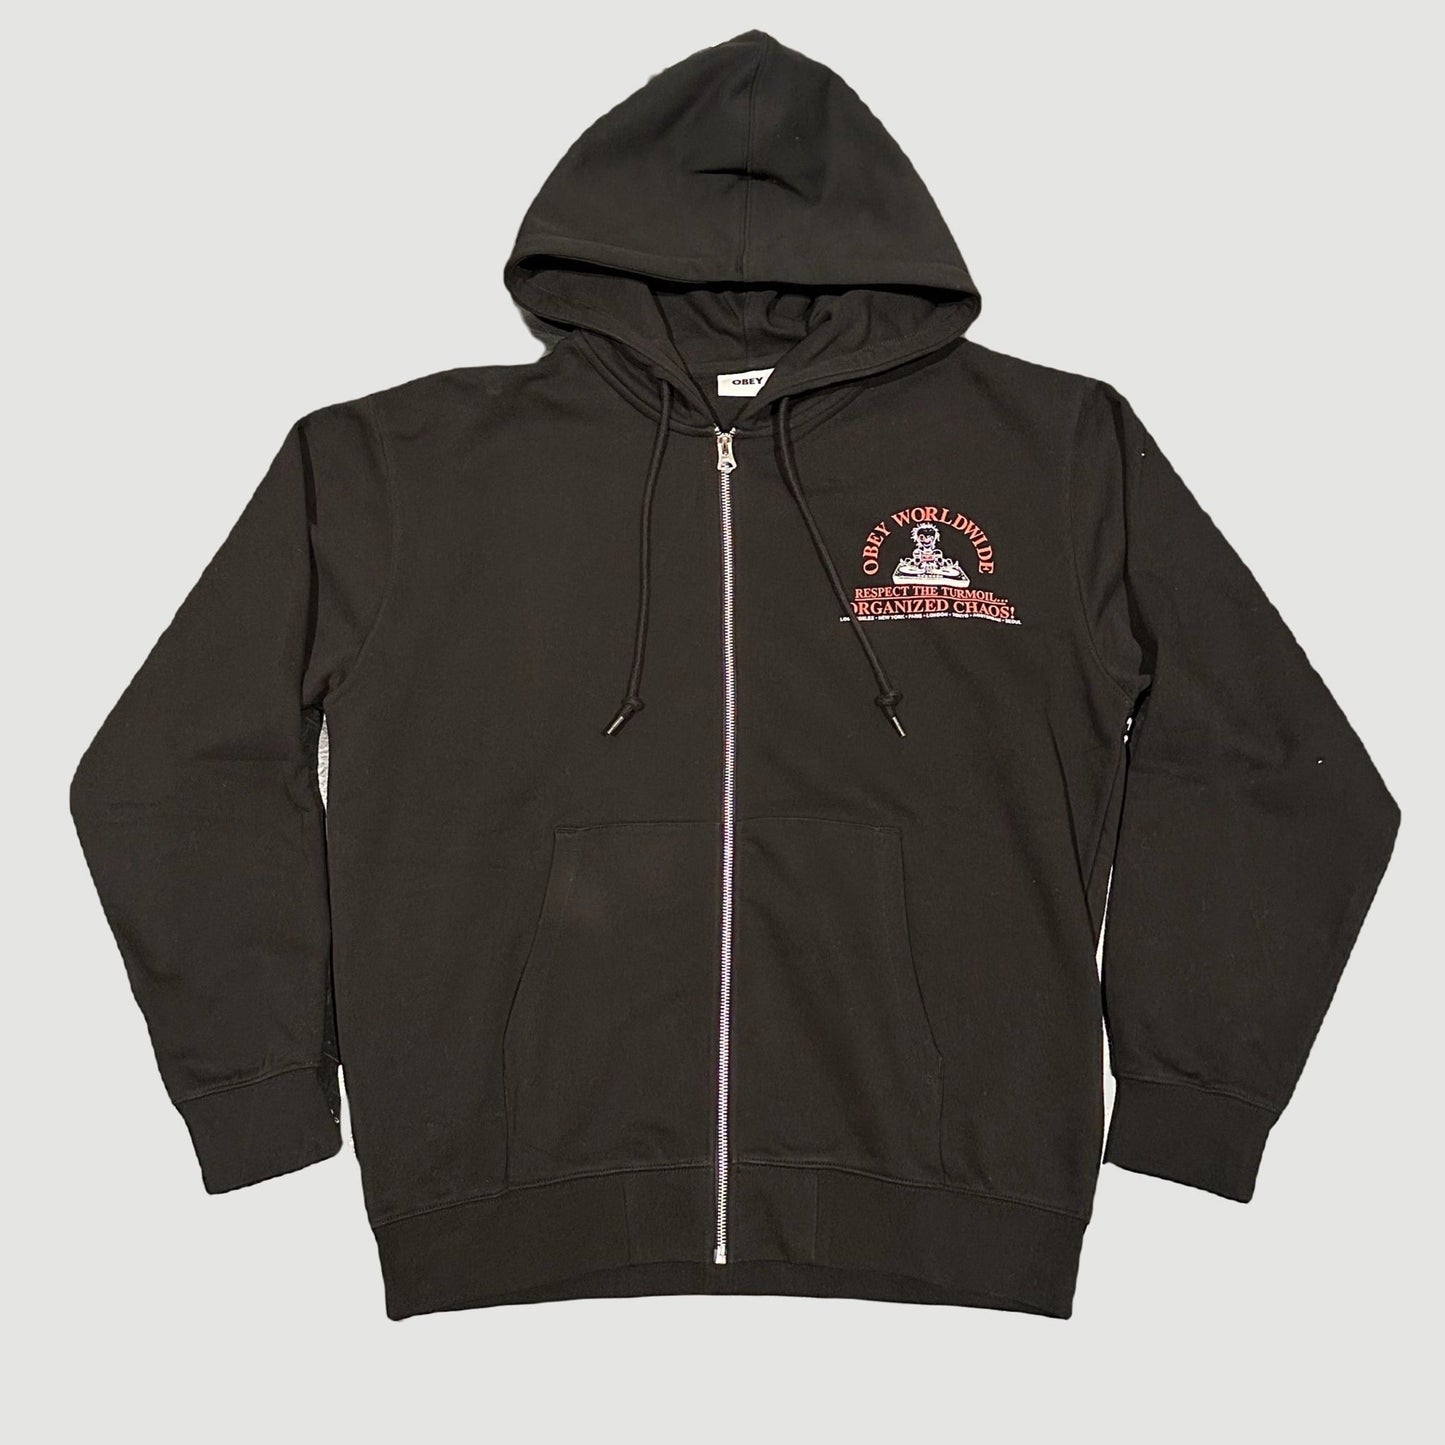 Obey Organized Chaos Zip-Up Hoodie